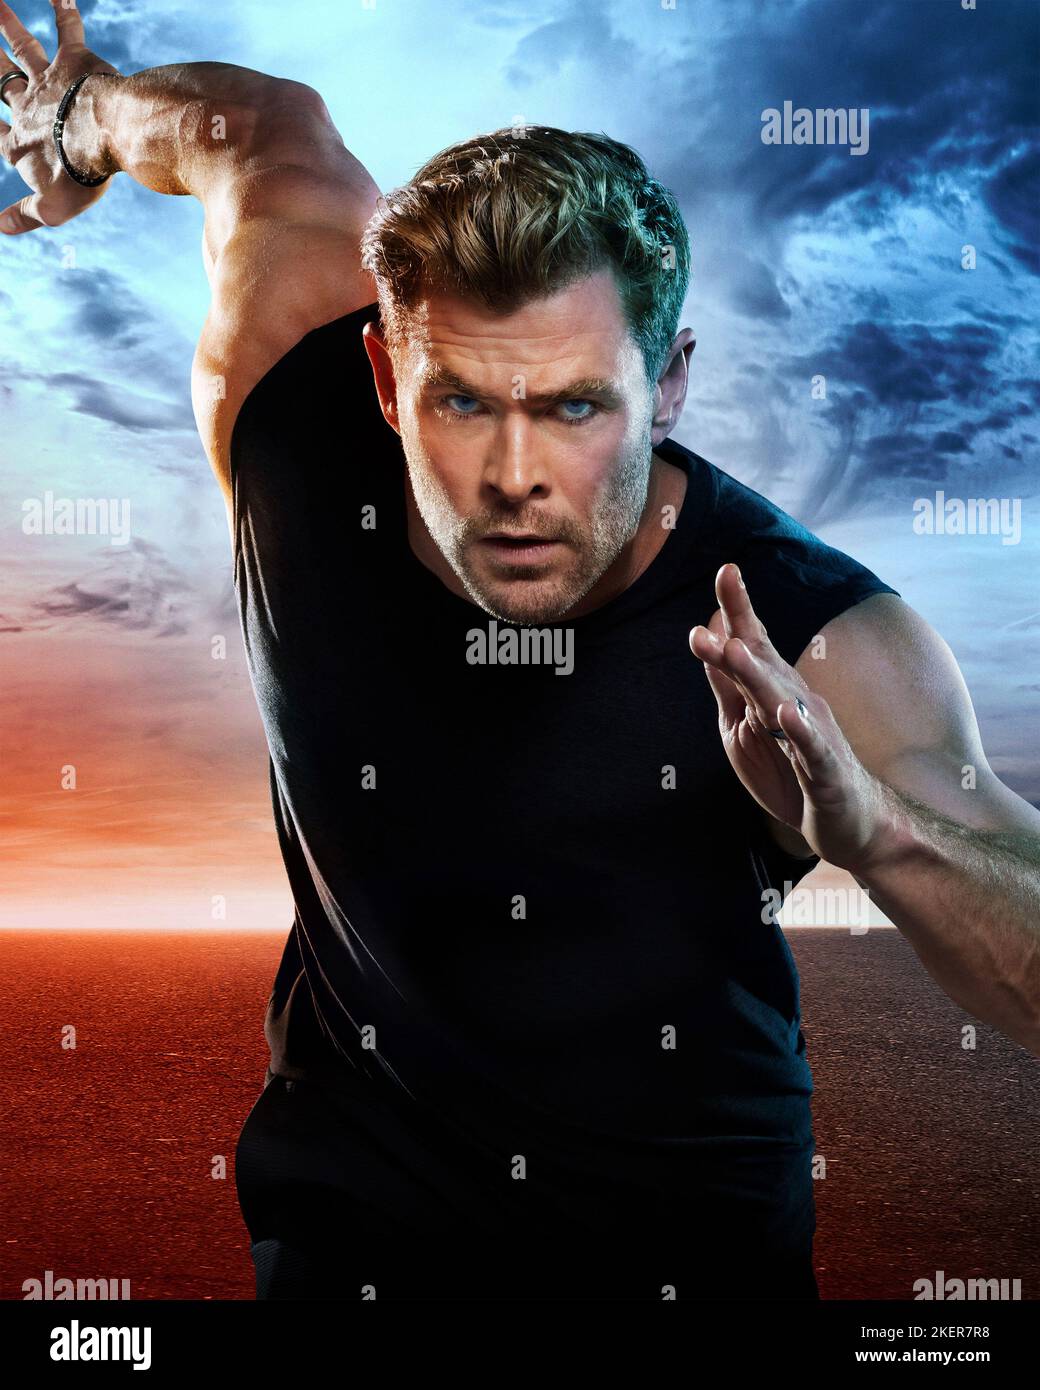 CHRIS HEMSWORTH in LIMITLESS (2022), directed by KIT LYNCH ROBINSON. Credit: NATIONAL GEOGRAPHIC / Album Stock Photo